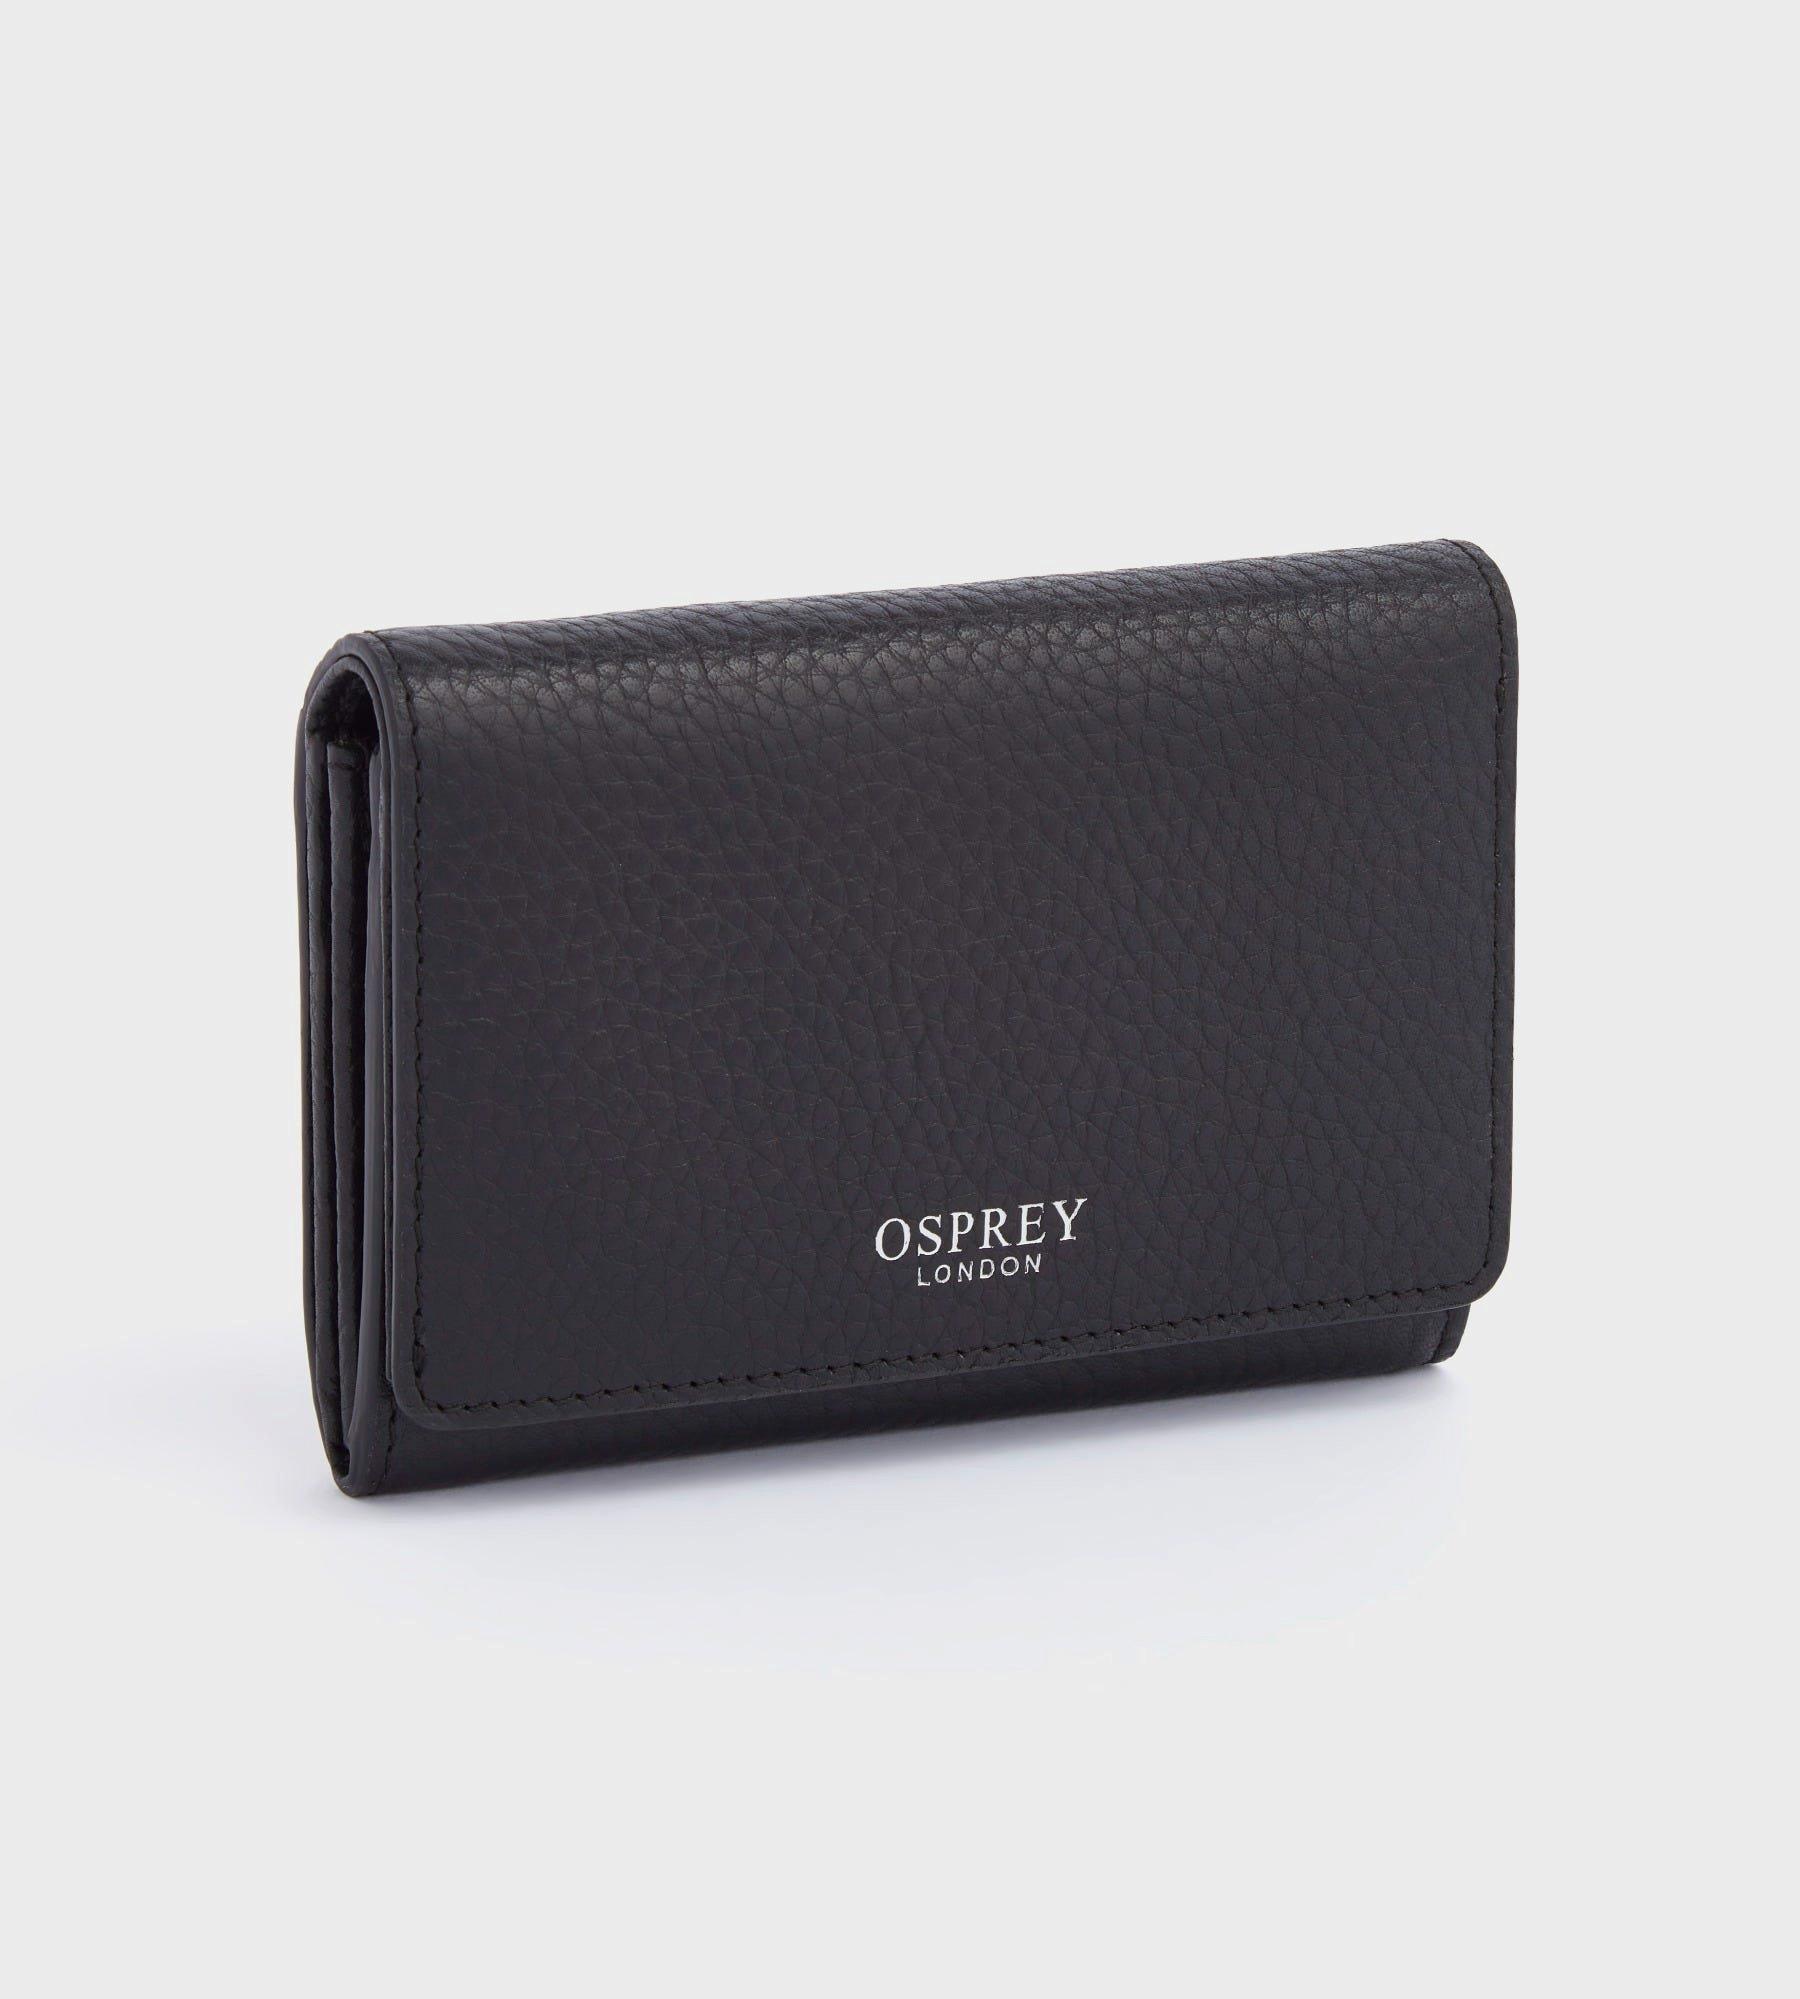 The Lyra Small Leather RFID Zip Purse in black | OSPREY LONDON